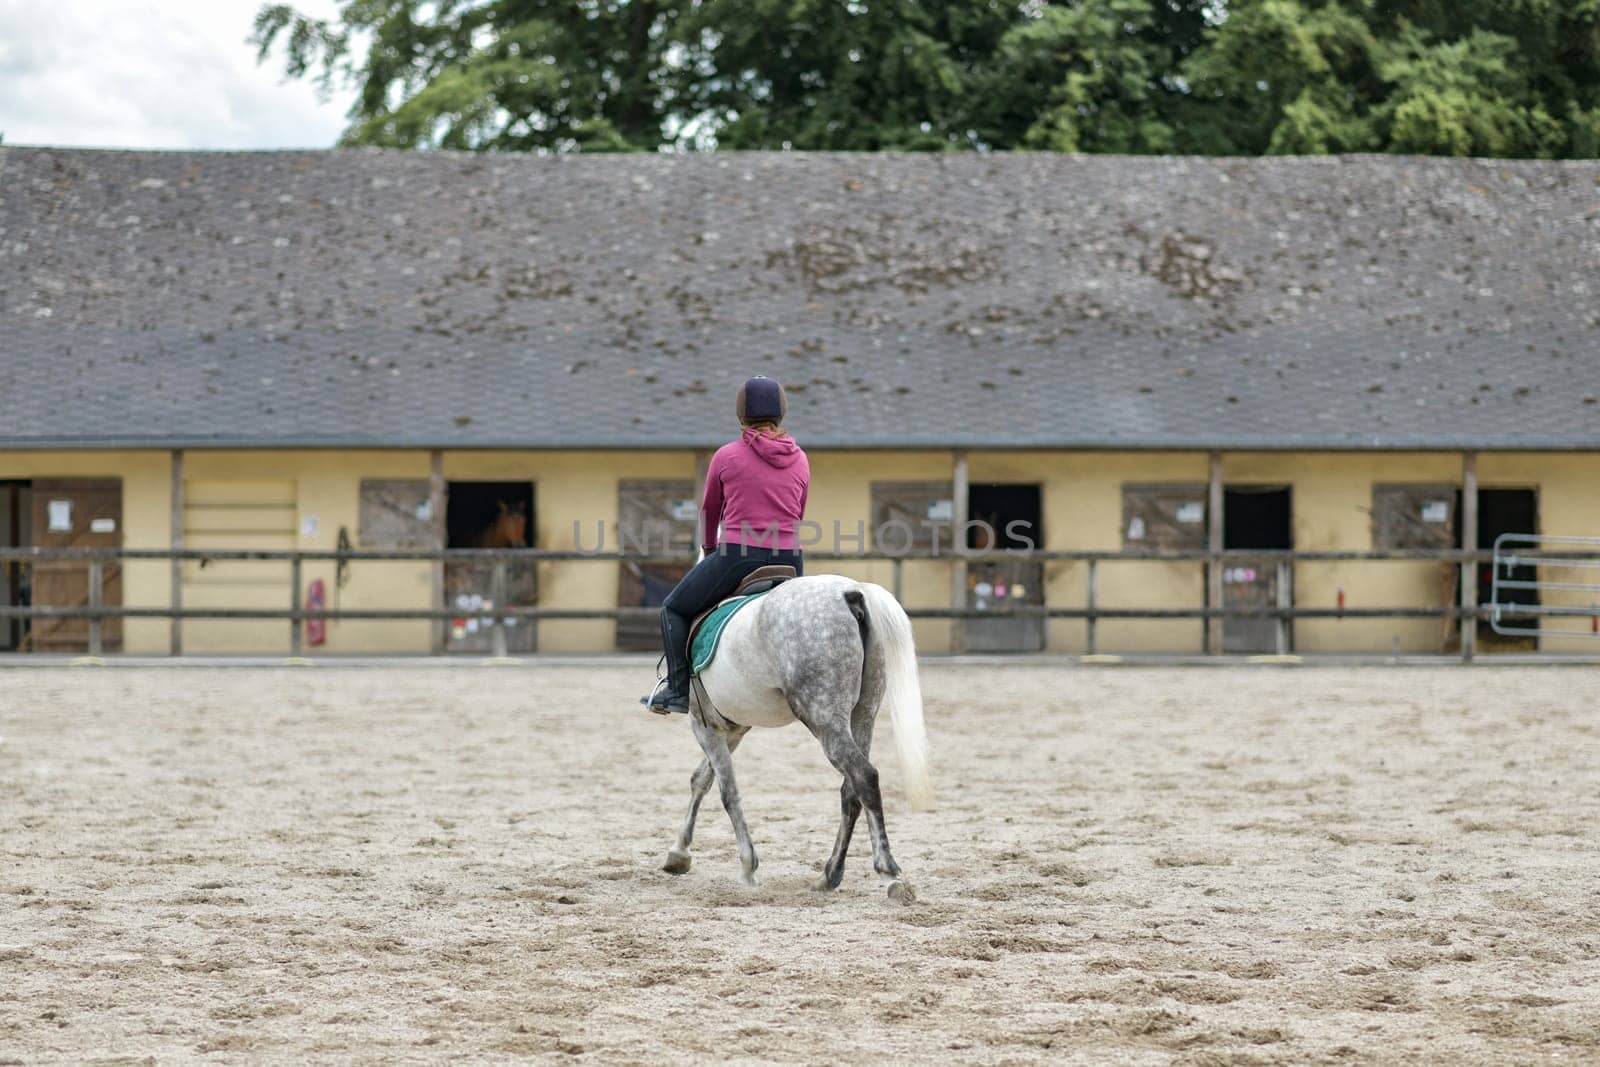 Horsewoman training on the white hors at the court by Godi